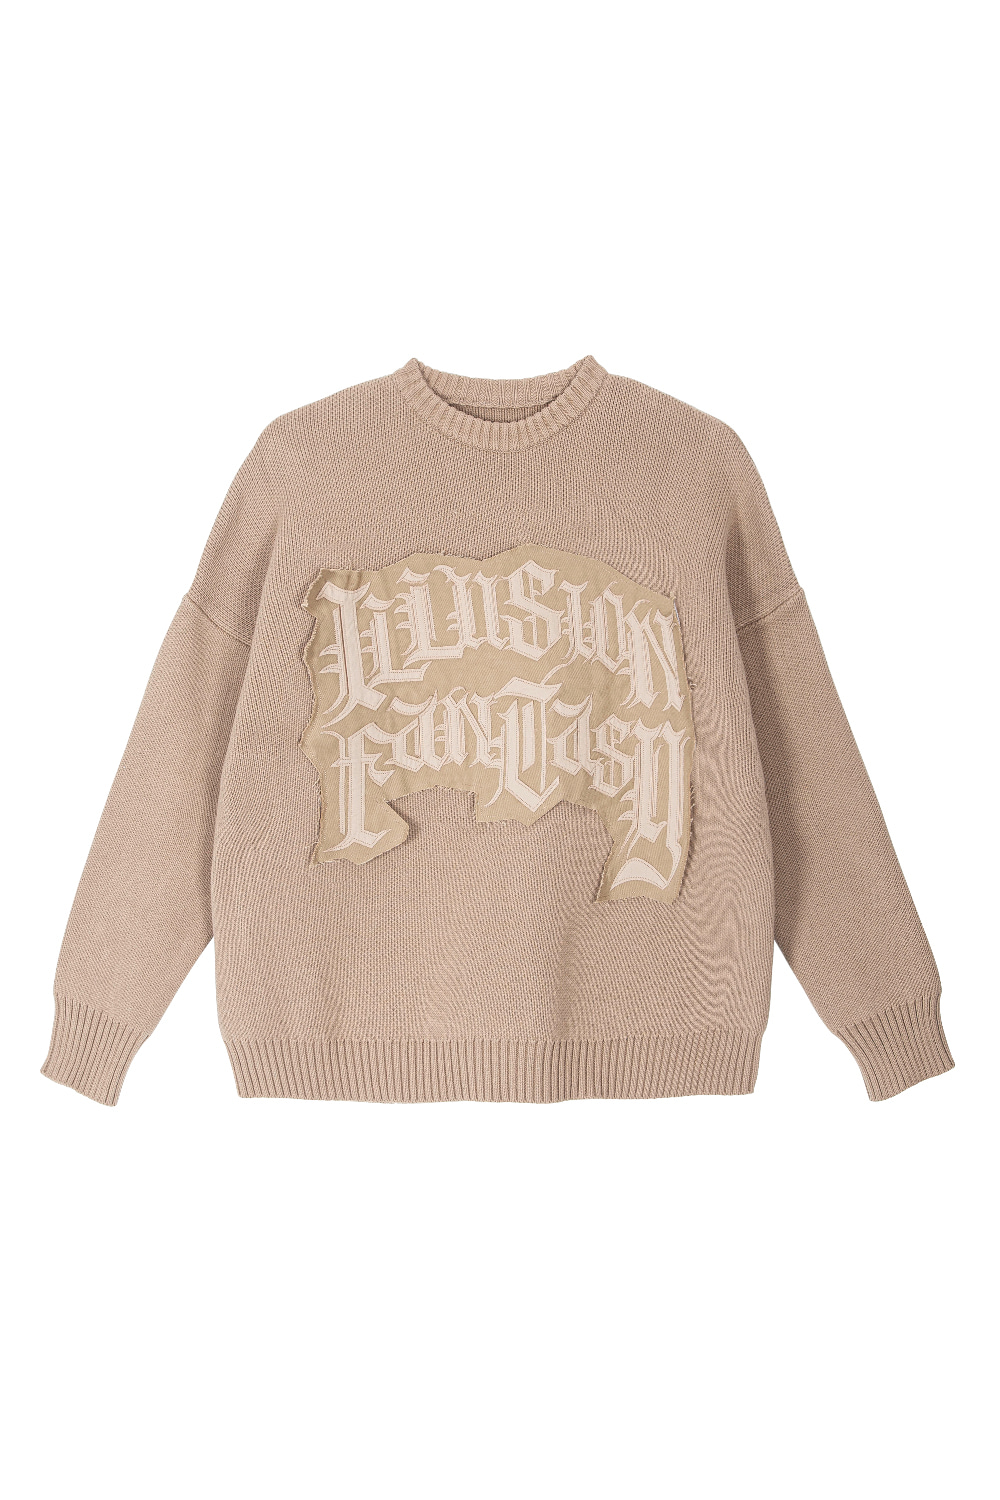 [SALE] ILLUSION FANTASY HEAVY KNIT SWEATER (SAND)GRAFFITIONMIND